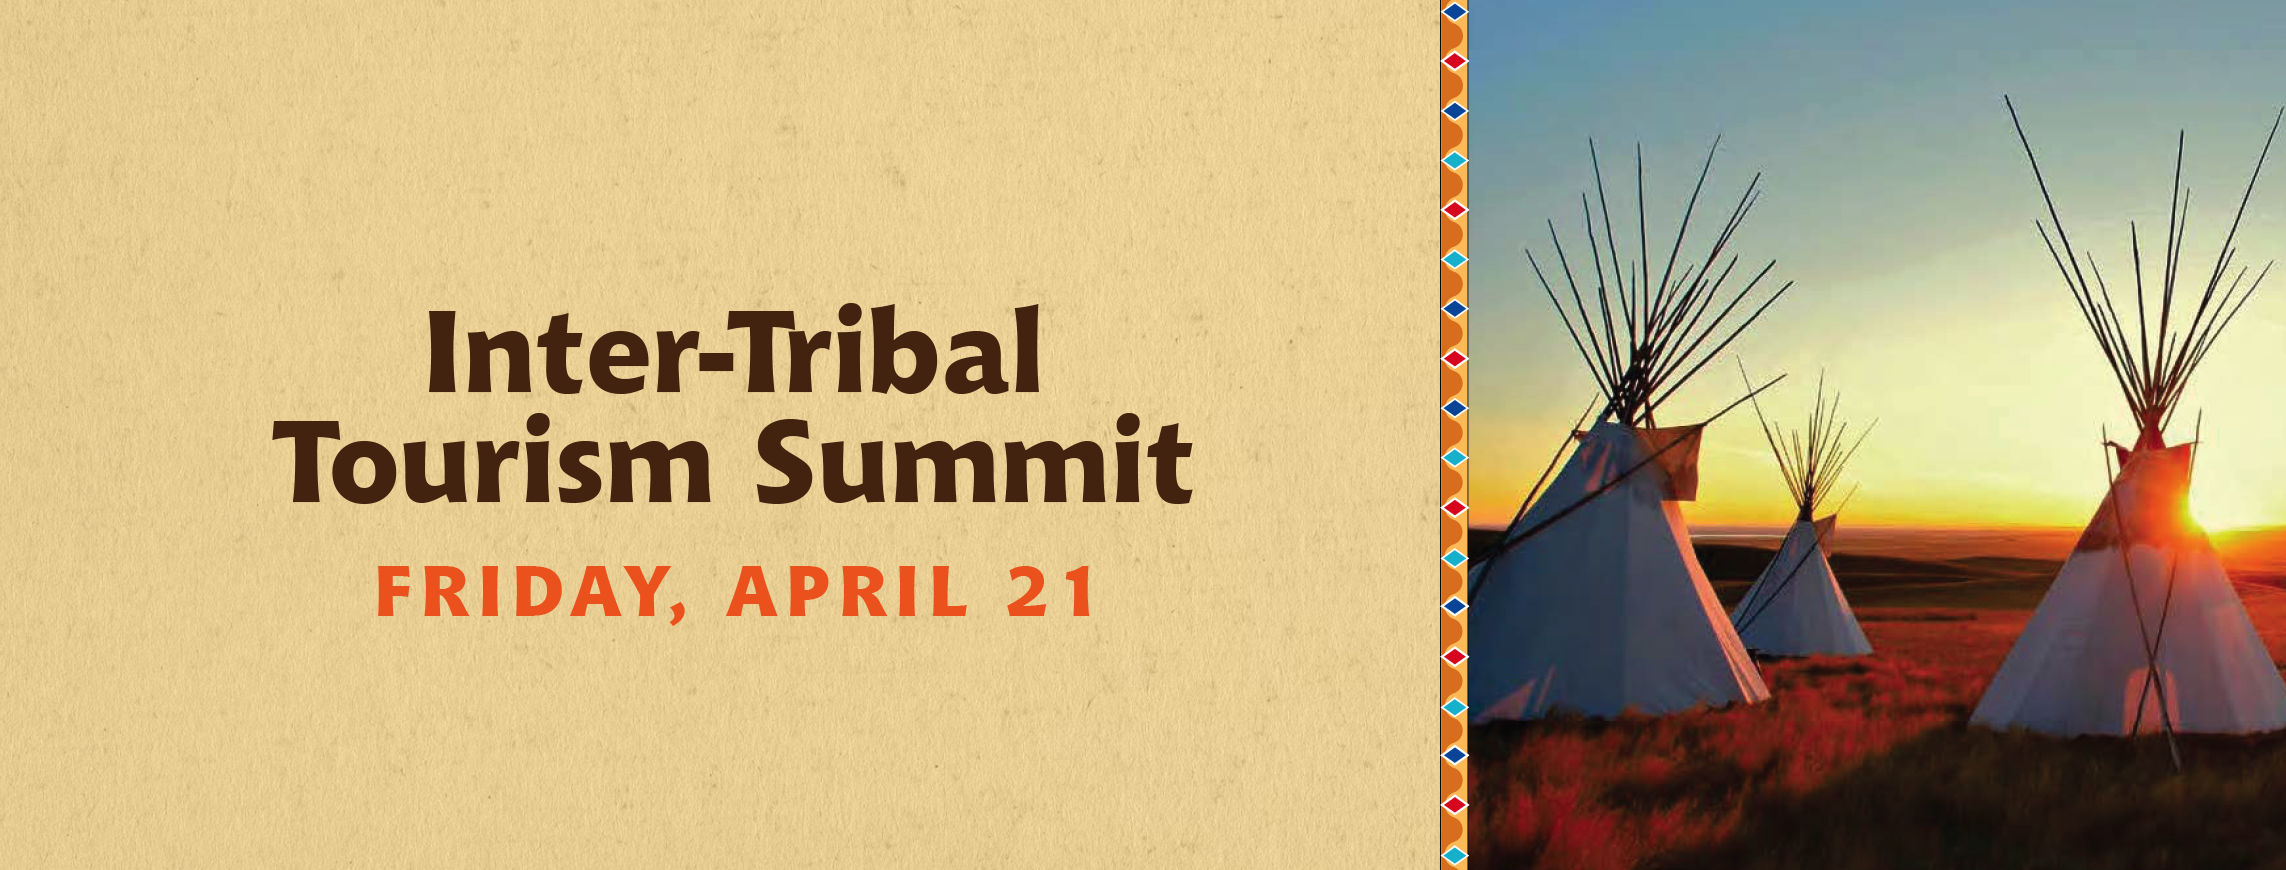 Inter-Tribal Tourism Summit, Friday, April 21 with picture of tepees